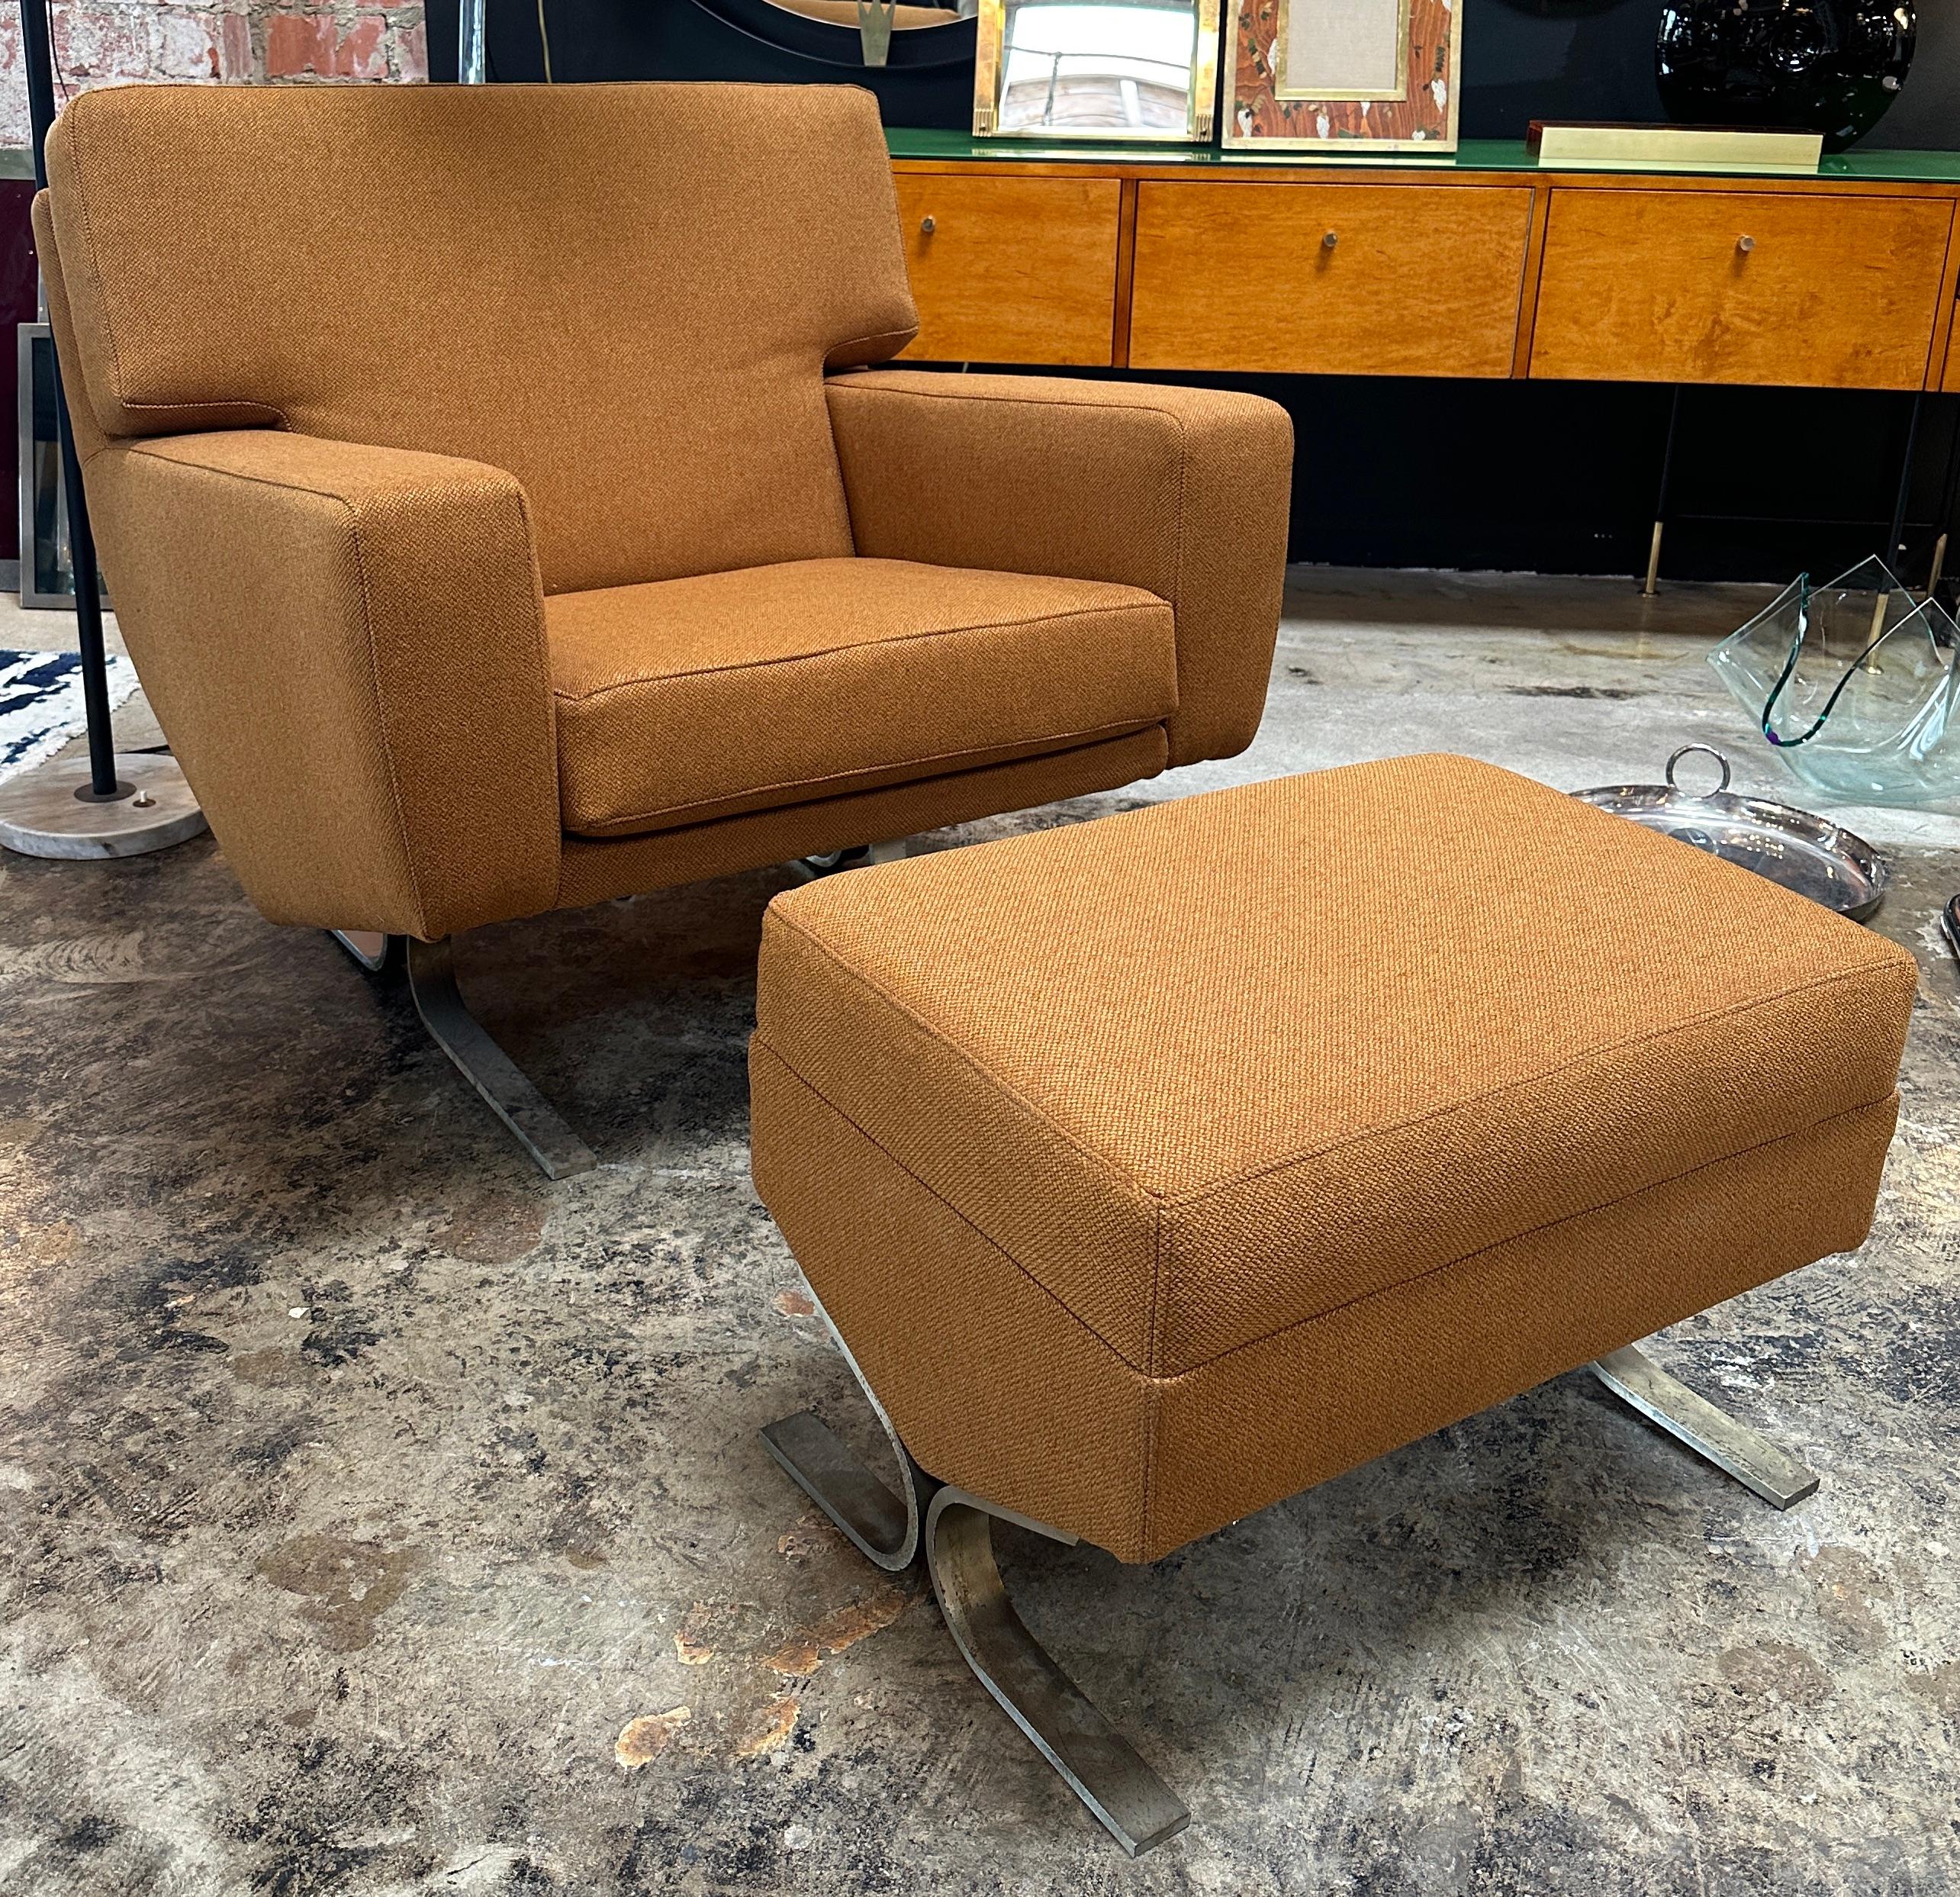 The midcentury Italian Lounge Chair and Ottoman designed by Franco Campo X F.lli Saporiti is a stylish and comfortable piece of furniture. It features a chrome base, which adds a sleek and modern touch to the design. The original orange fabric